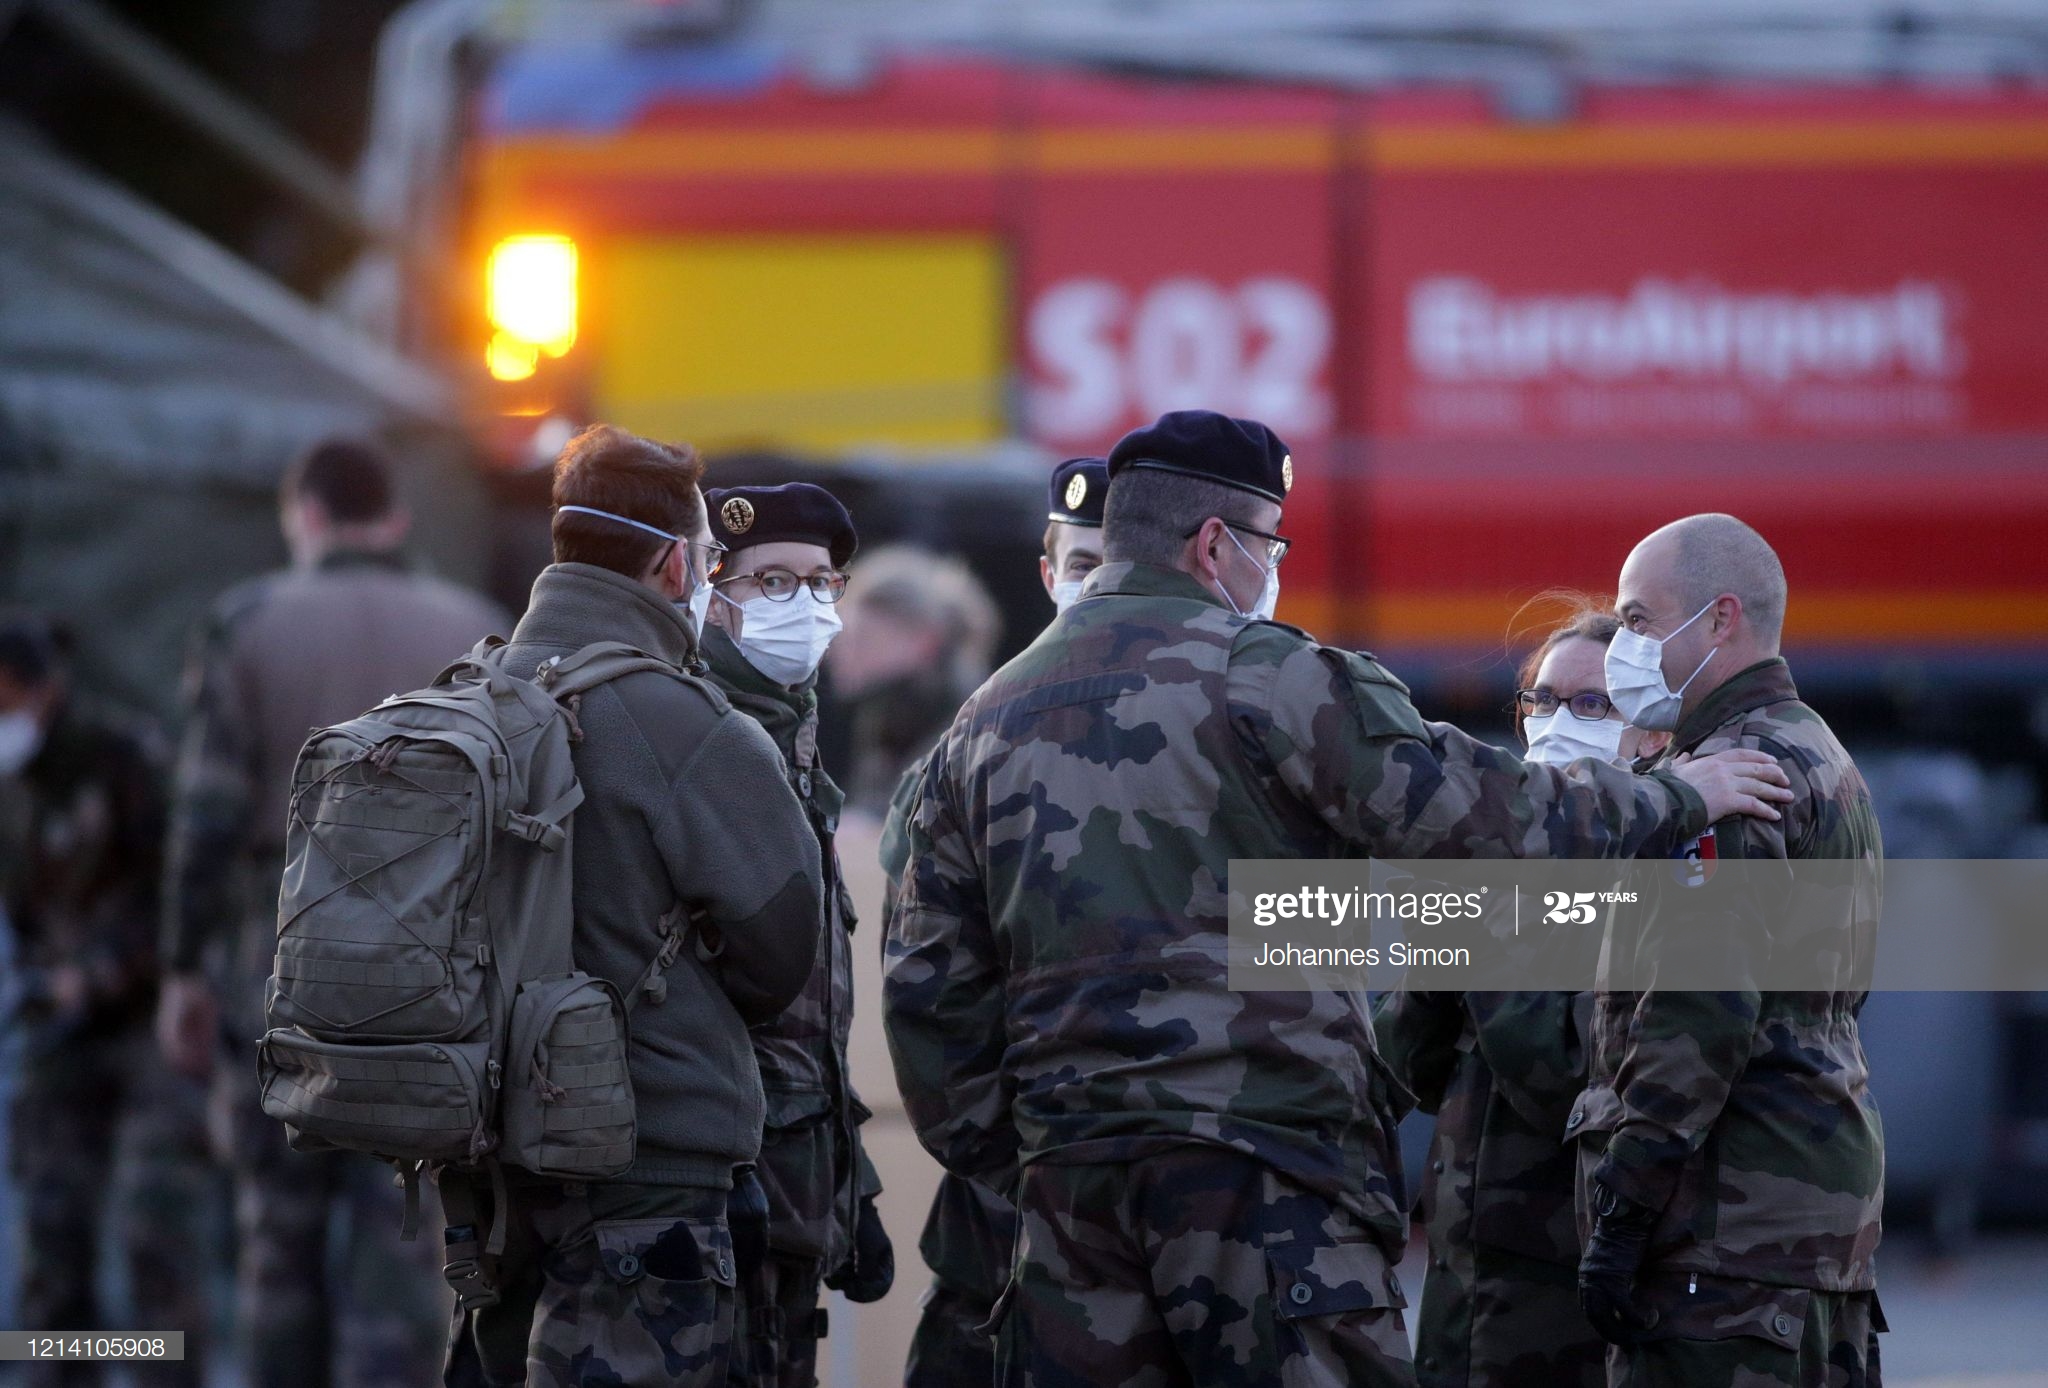 french-soldiers-wearing-protective-masks-talk-before-setting-up-tents-picture-id1214105908